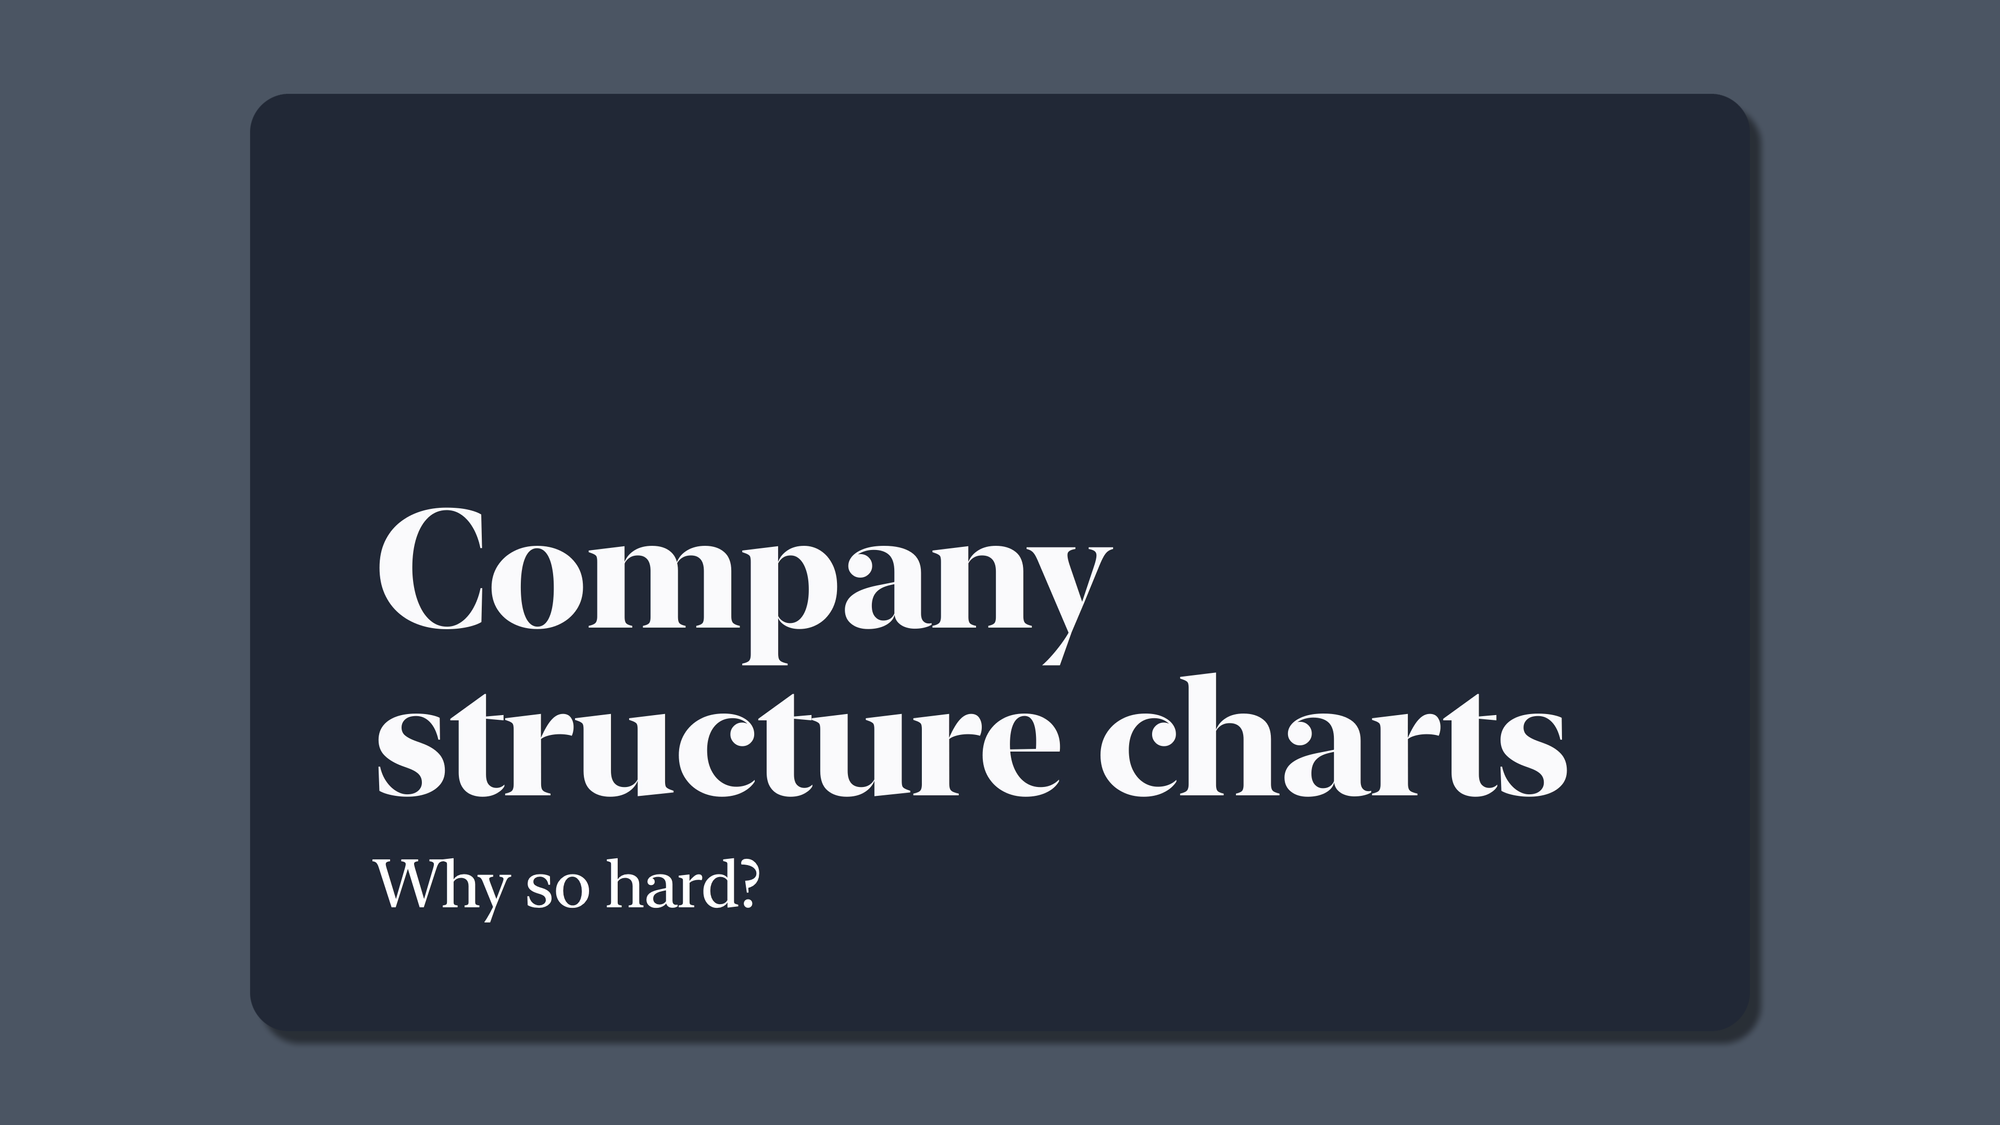 Why are company structure charts so hard?